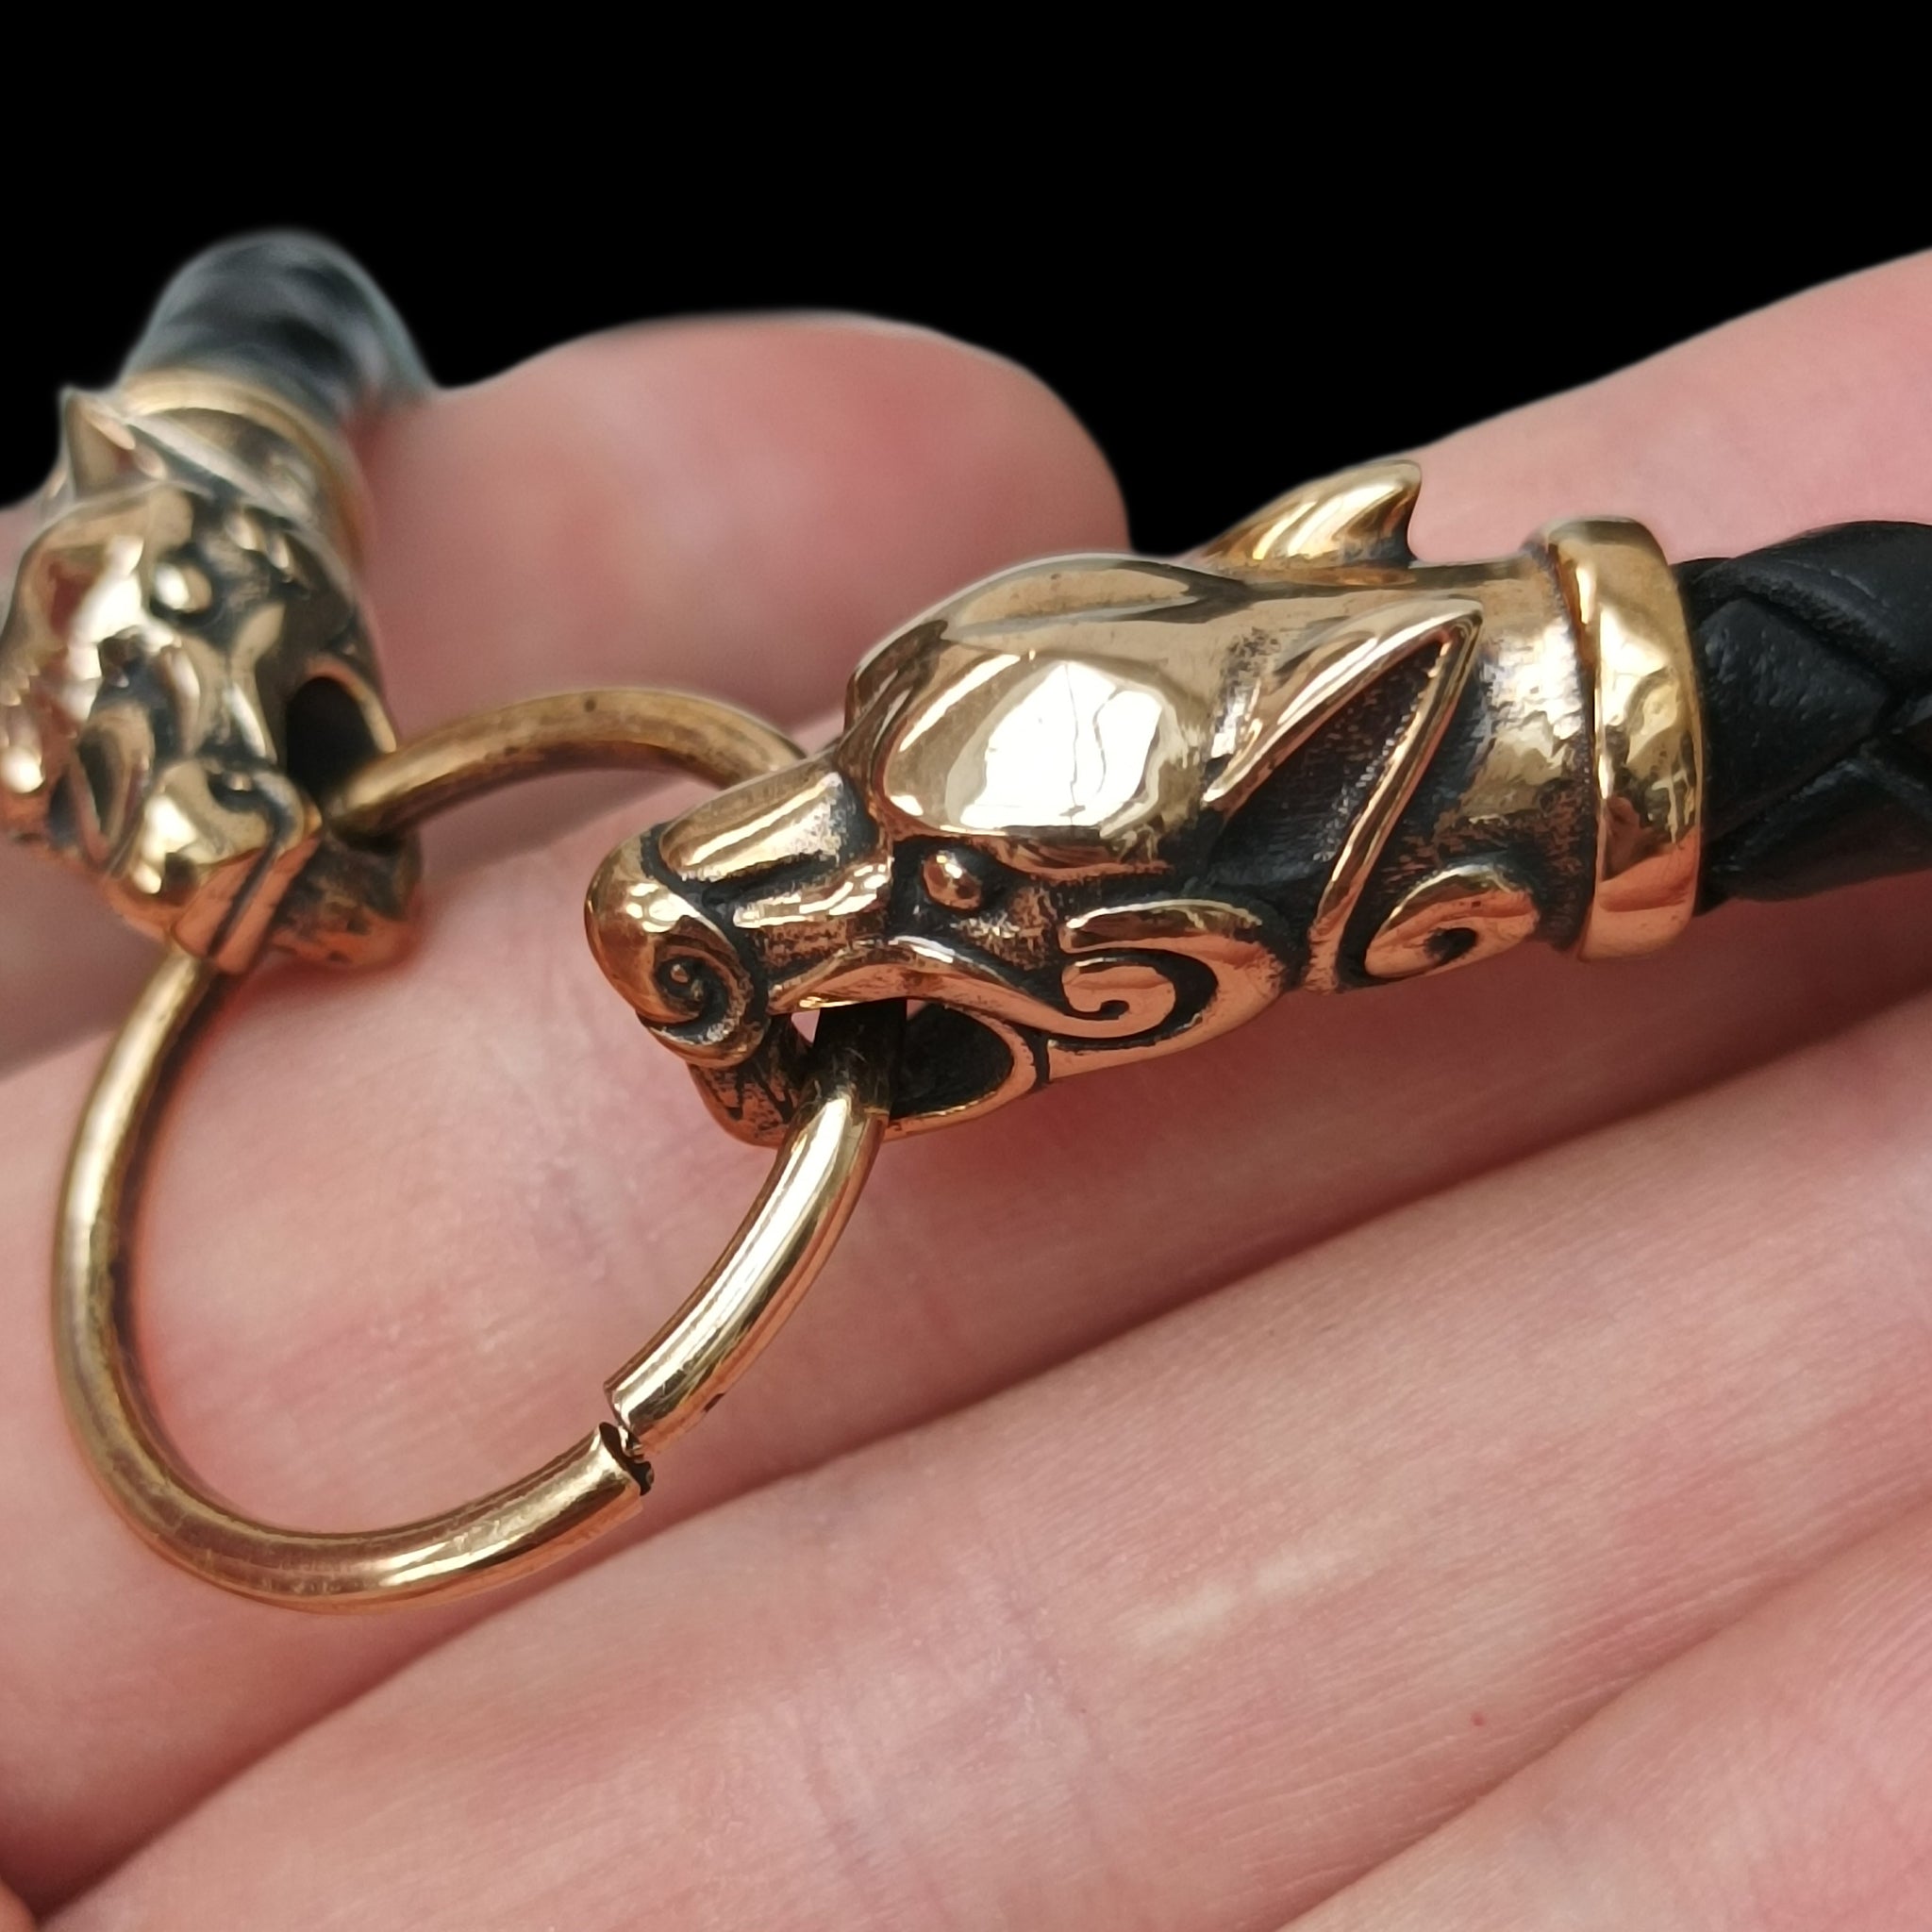 8mm Width Braided Leather Necklace with Bronze Ferocious Wolf Heads and Split Ring on Hand - Close Up Side View